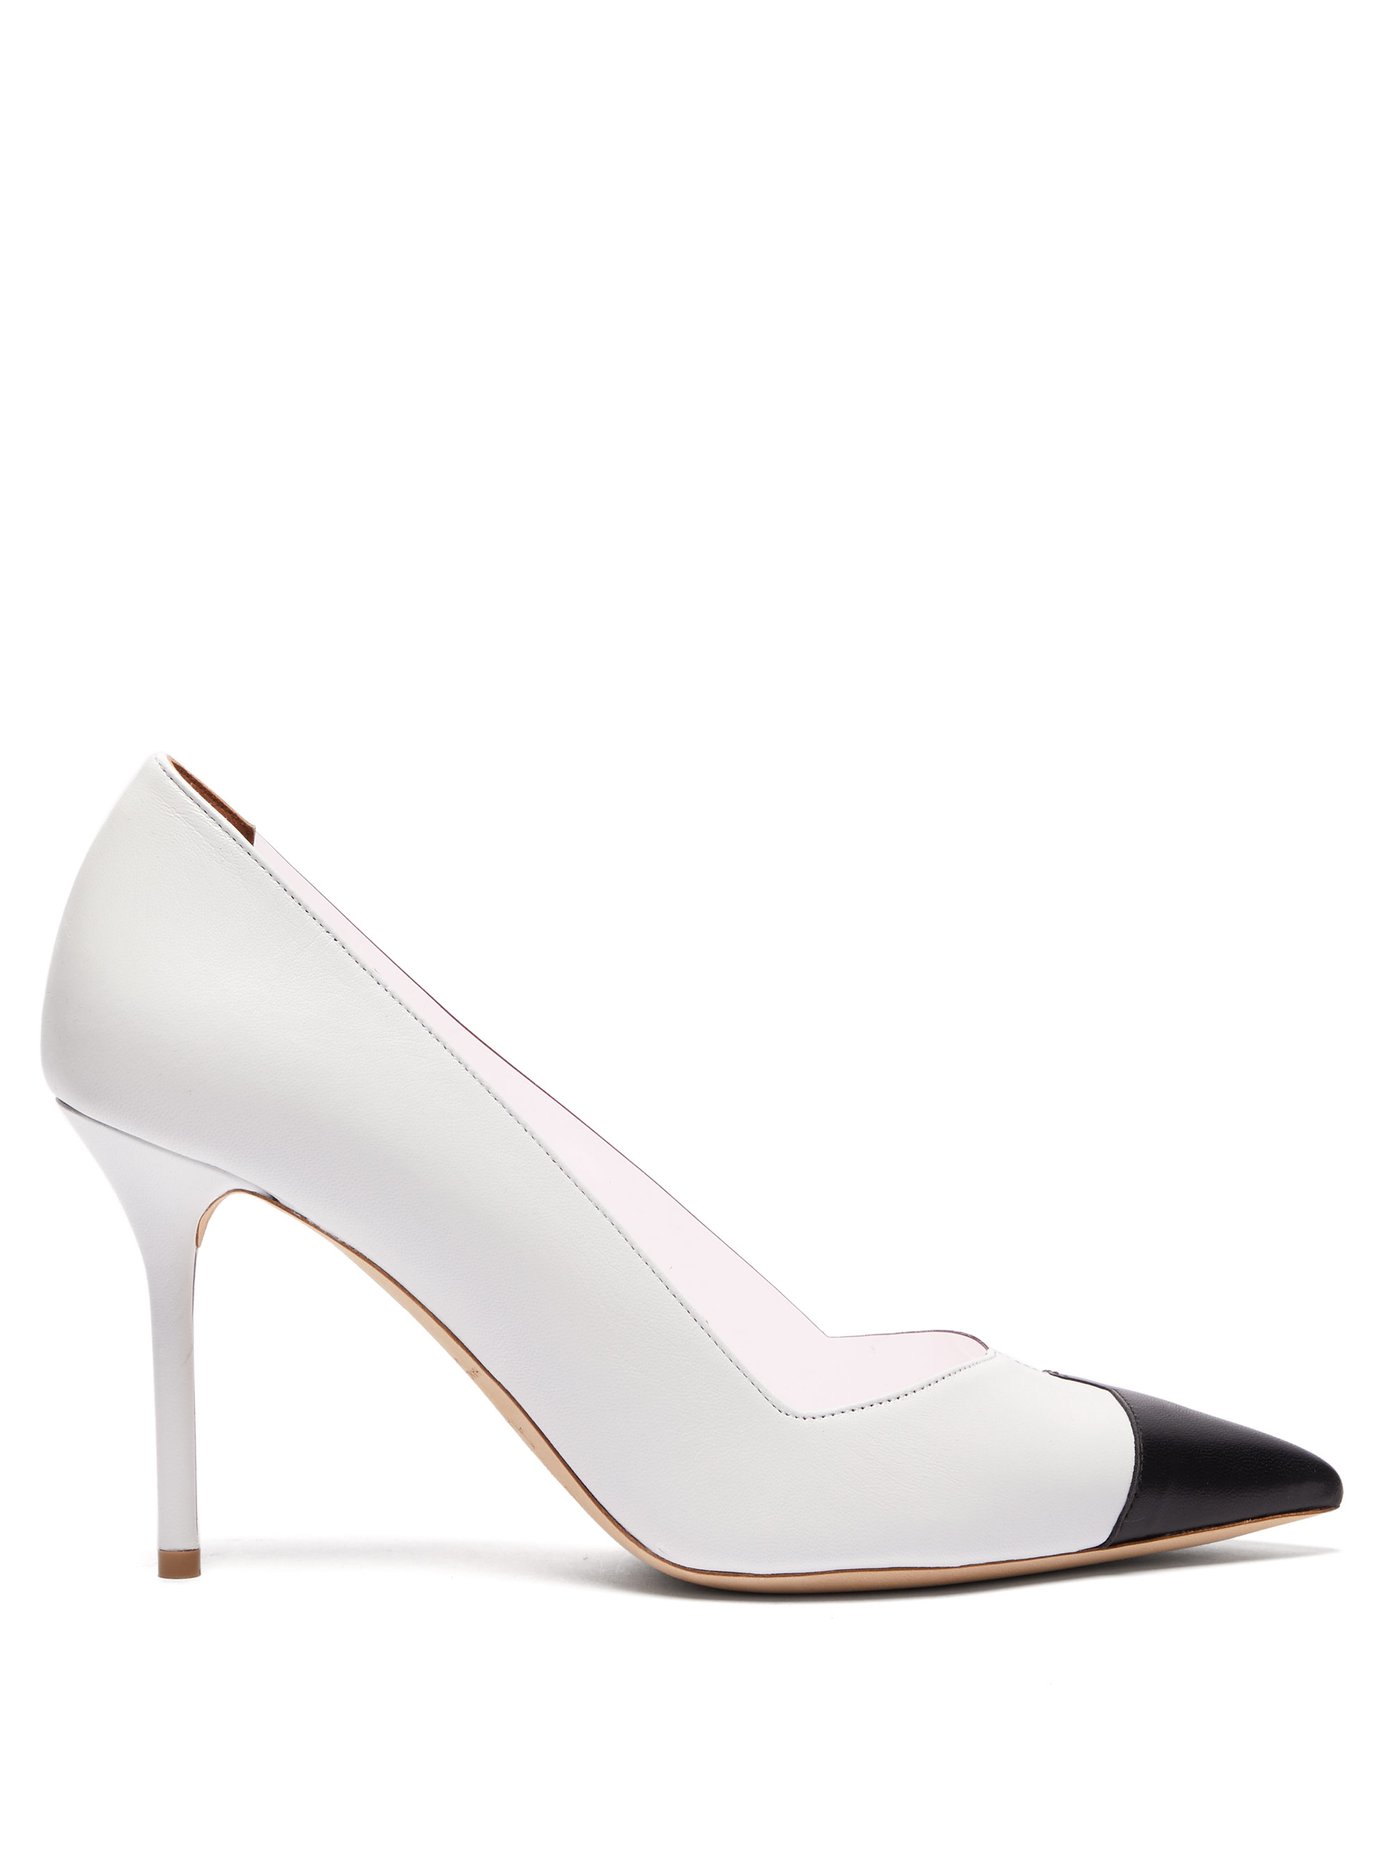 white leather pumps uk